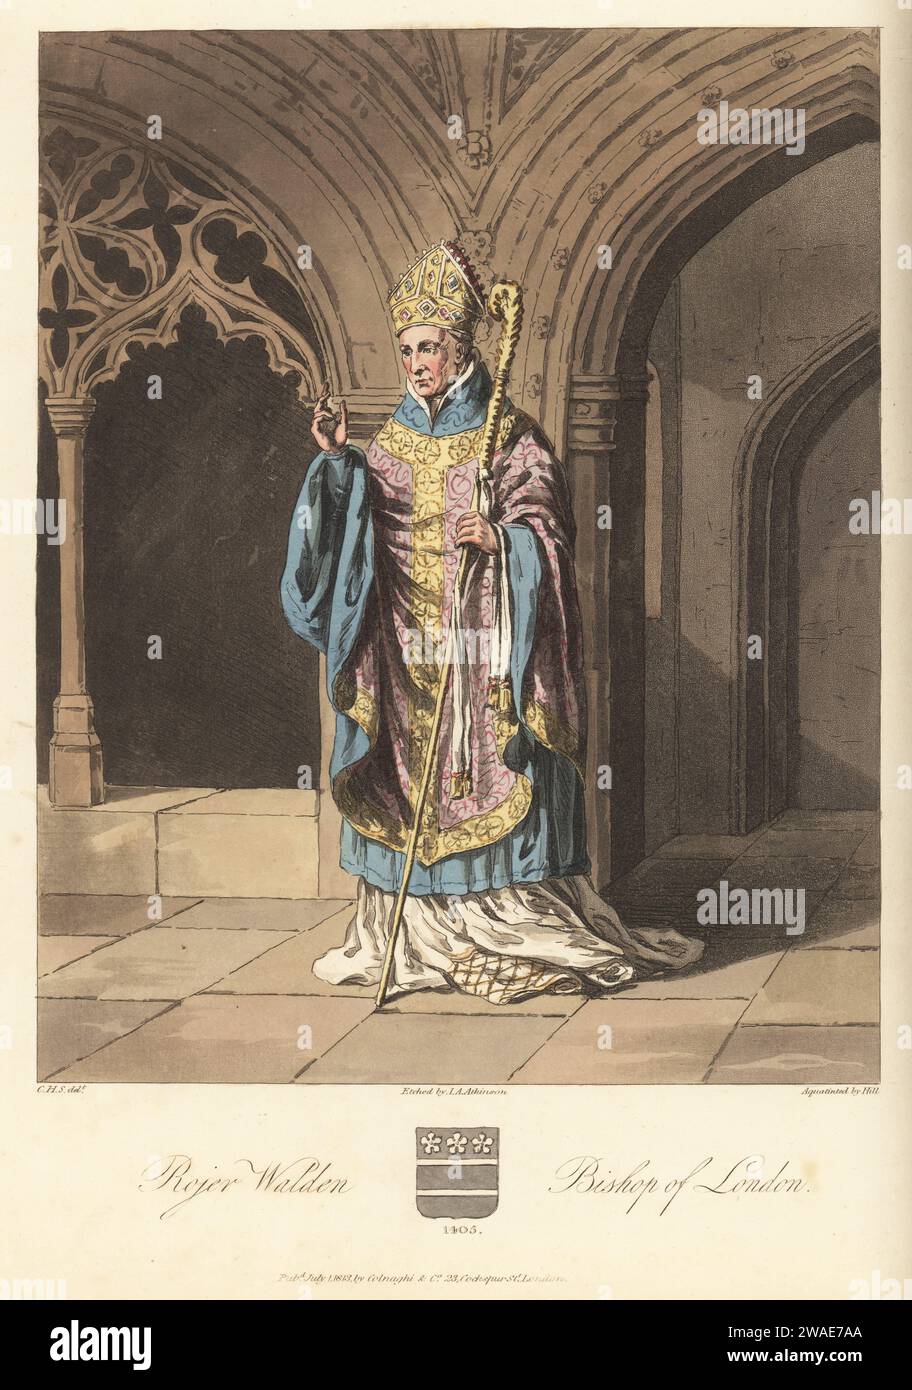 Roger Walden, Bishop of London, Treasurer, died 1406. Bishop in bejeweled mitre, embroidered surplice and albe, holding a gold crozier. From a stained glass in St. Mary's Guildhall, Coventry. Handcoloured copperplate engraving etched by John Augustus Atkinson, aquatinted by John Hill, after an illustration by Charles Hamilton Smith from his own Selections of Ancient Costume of Great Britain and Ireland, Colnaghi and Co., London, 1814. Stock Photo